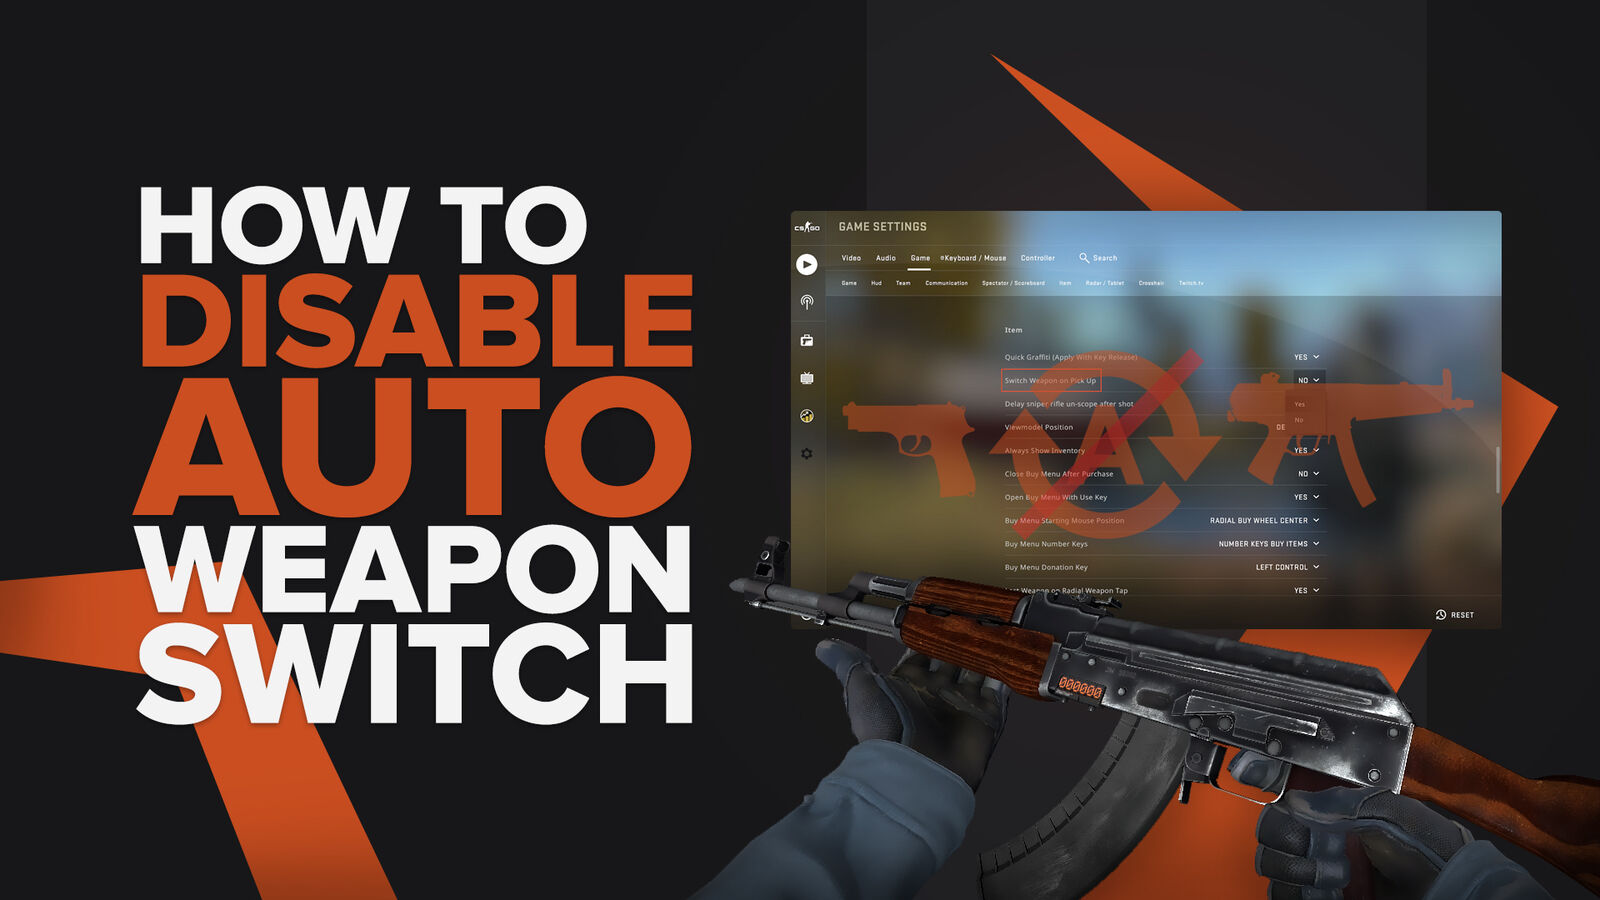 How To Disable Auto Weapon Switch in CS2?